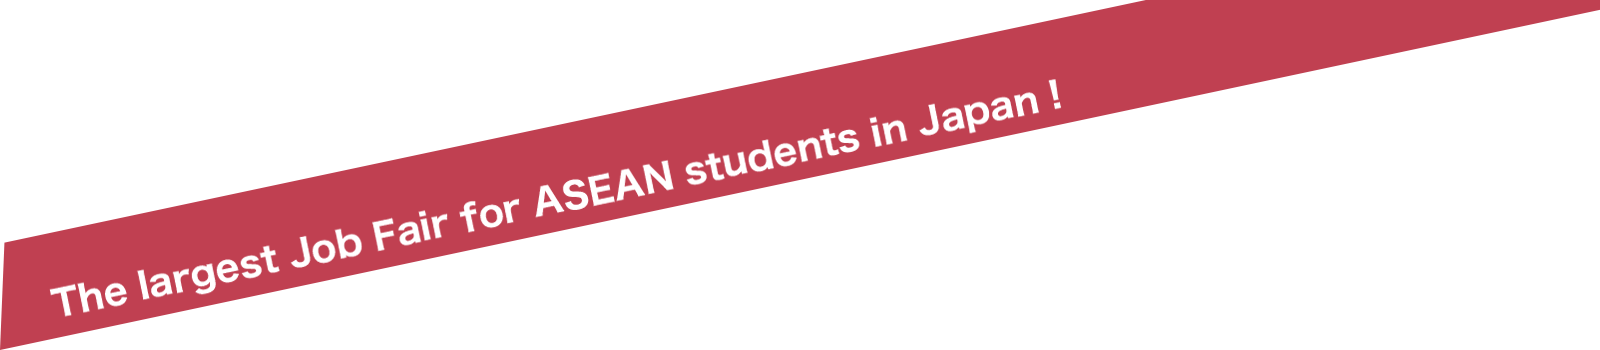 The largest Job Fair for ASEAN students in Japan！